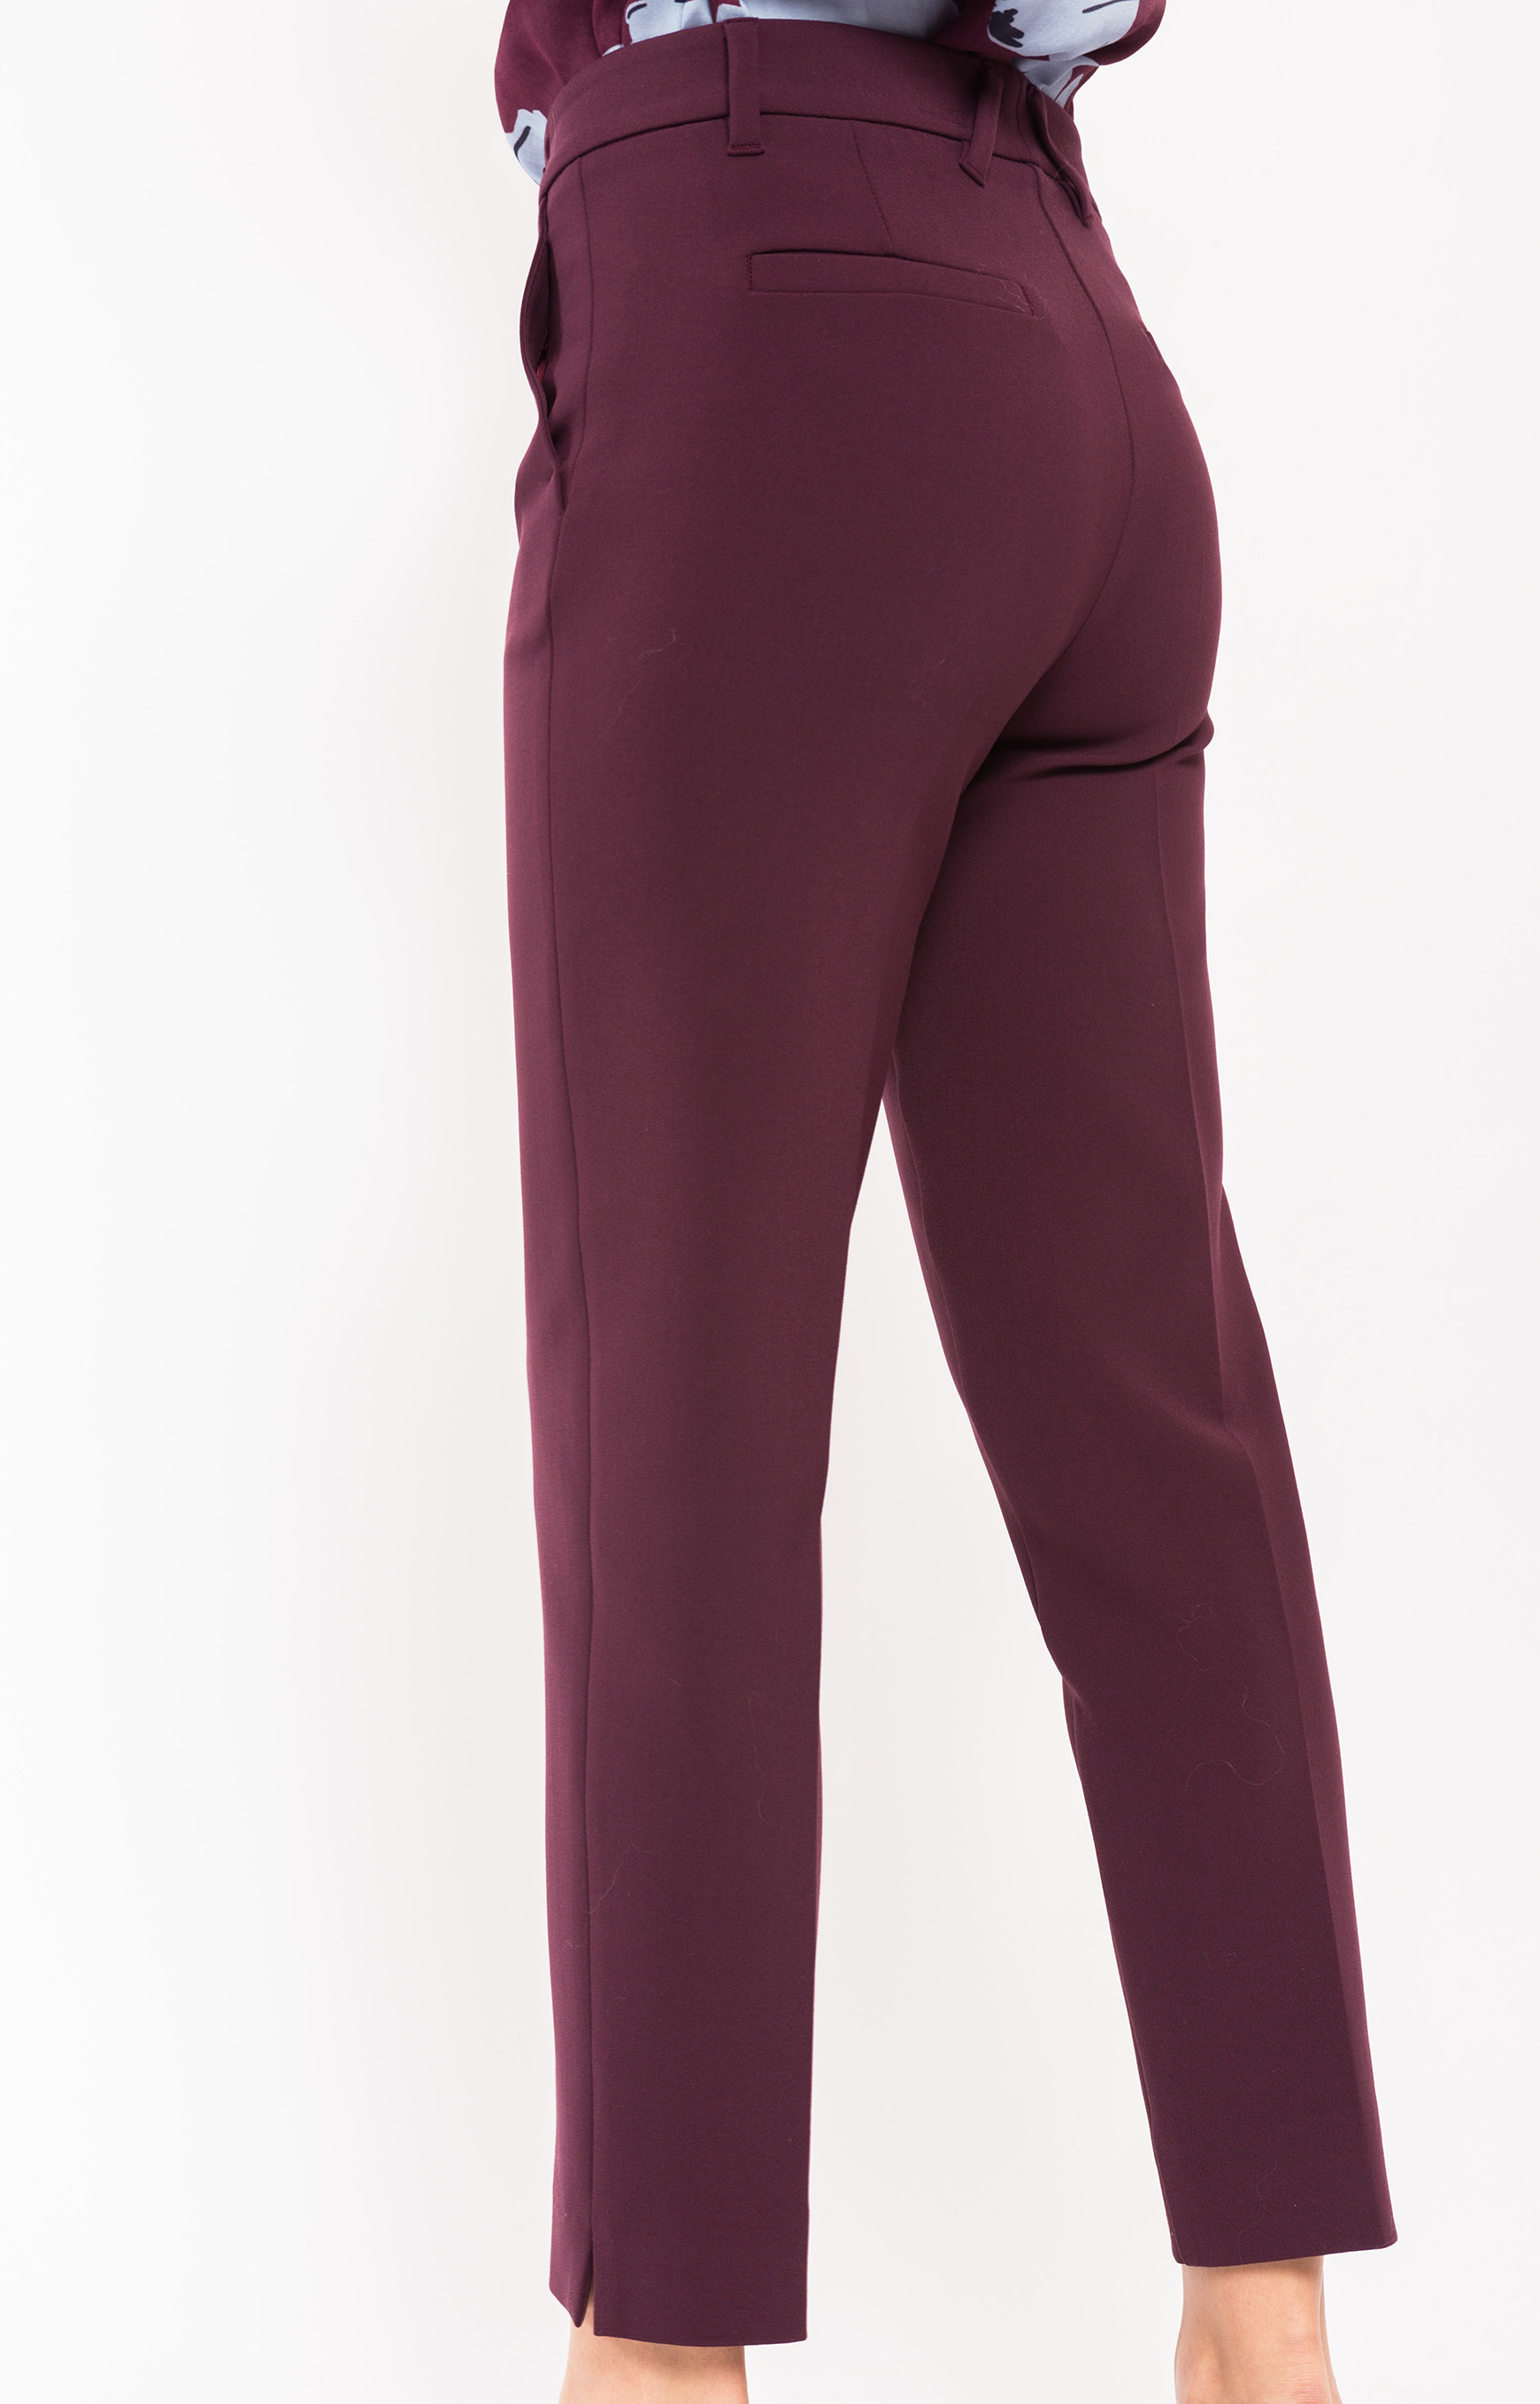 Ankle length trousers in aubergine